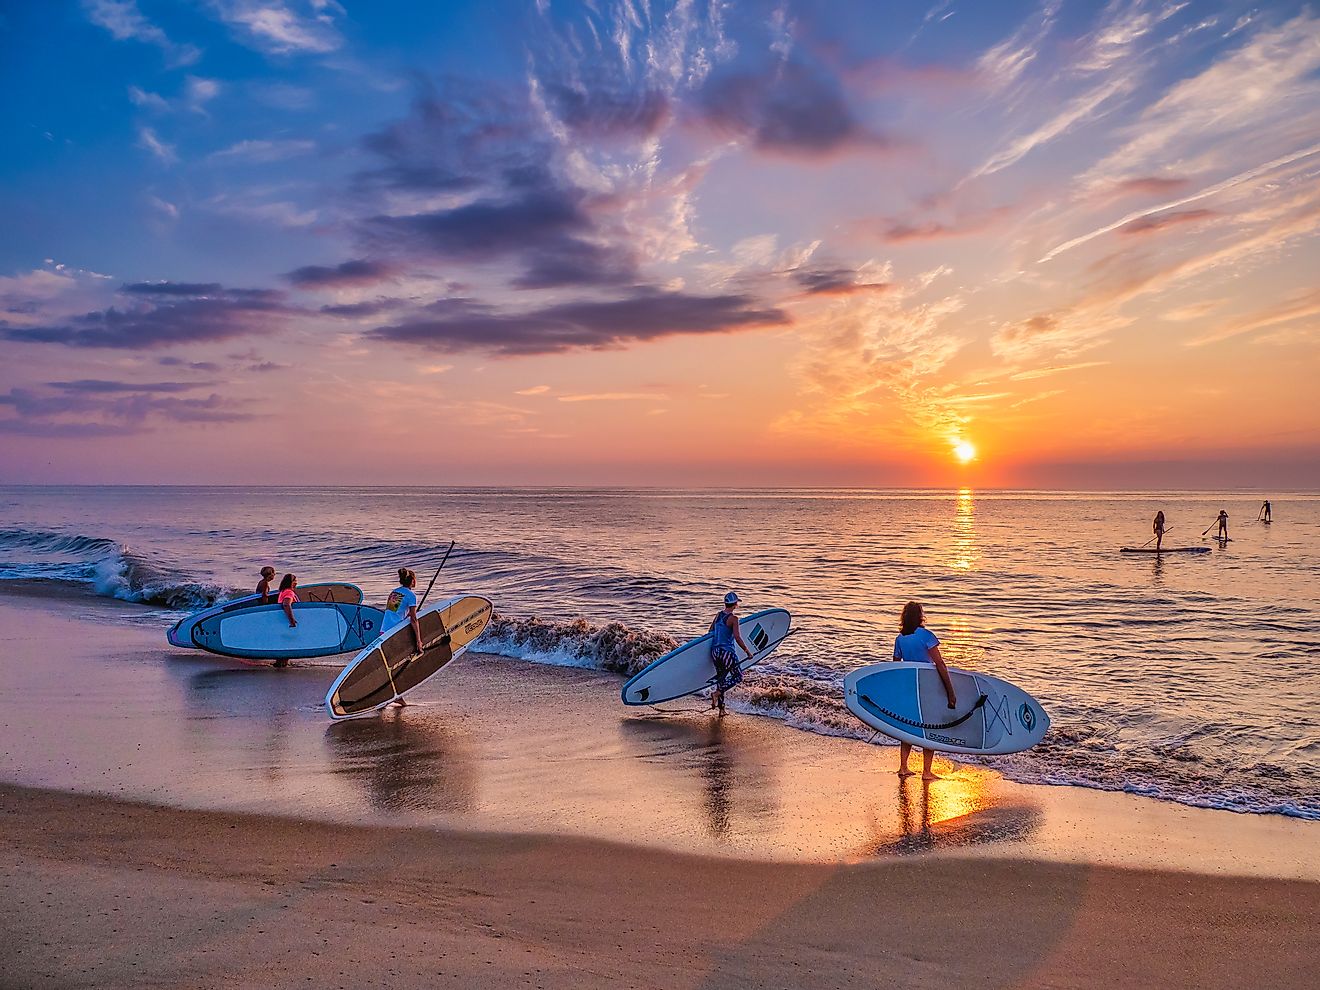 Group of young women paddleboarding at sunrise along the coast of Bethany Beach, Delaware, USA. Editorial credit: David Kay / Shutterstock.com